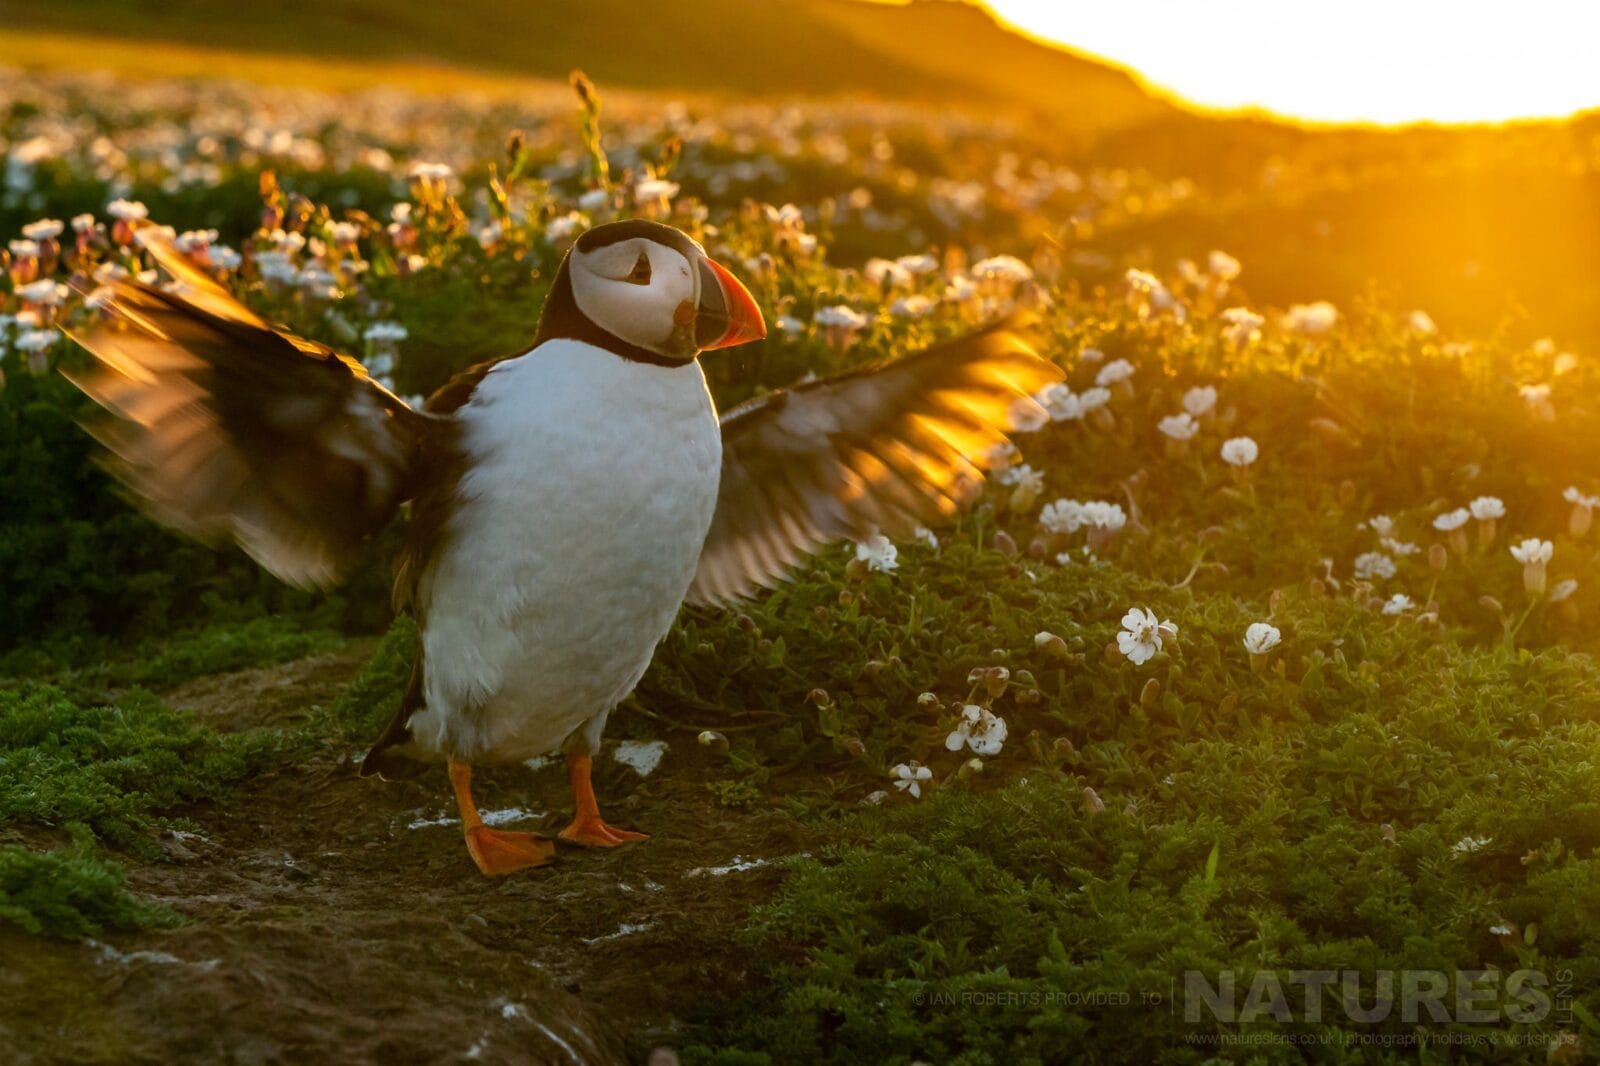 A Puffin Stretches Its Wings, Illuminated From Behind By The Rising Sun This Image Was Captured During The Natureslens Welsh Puffins Of Skomer Island Photography Holiday